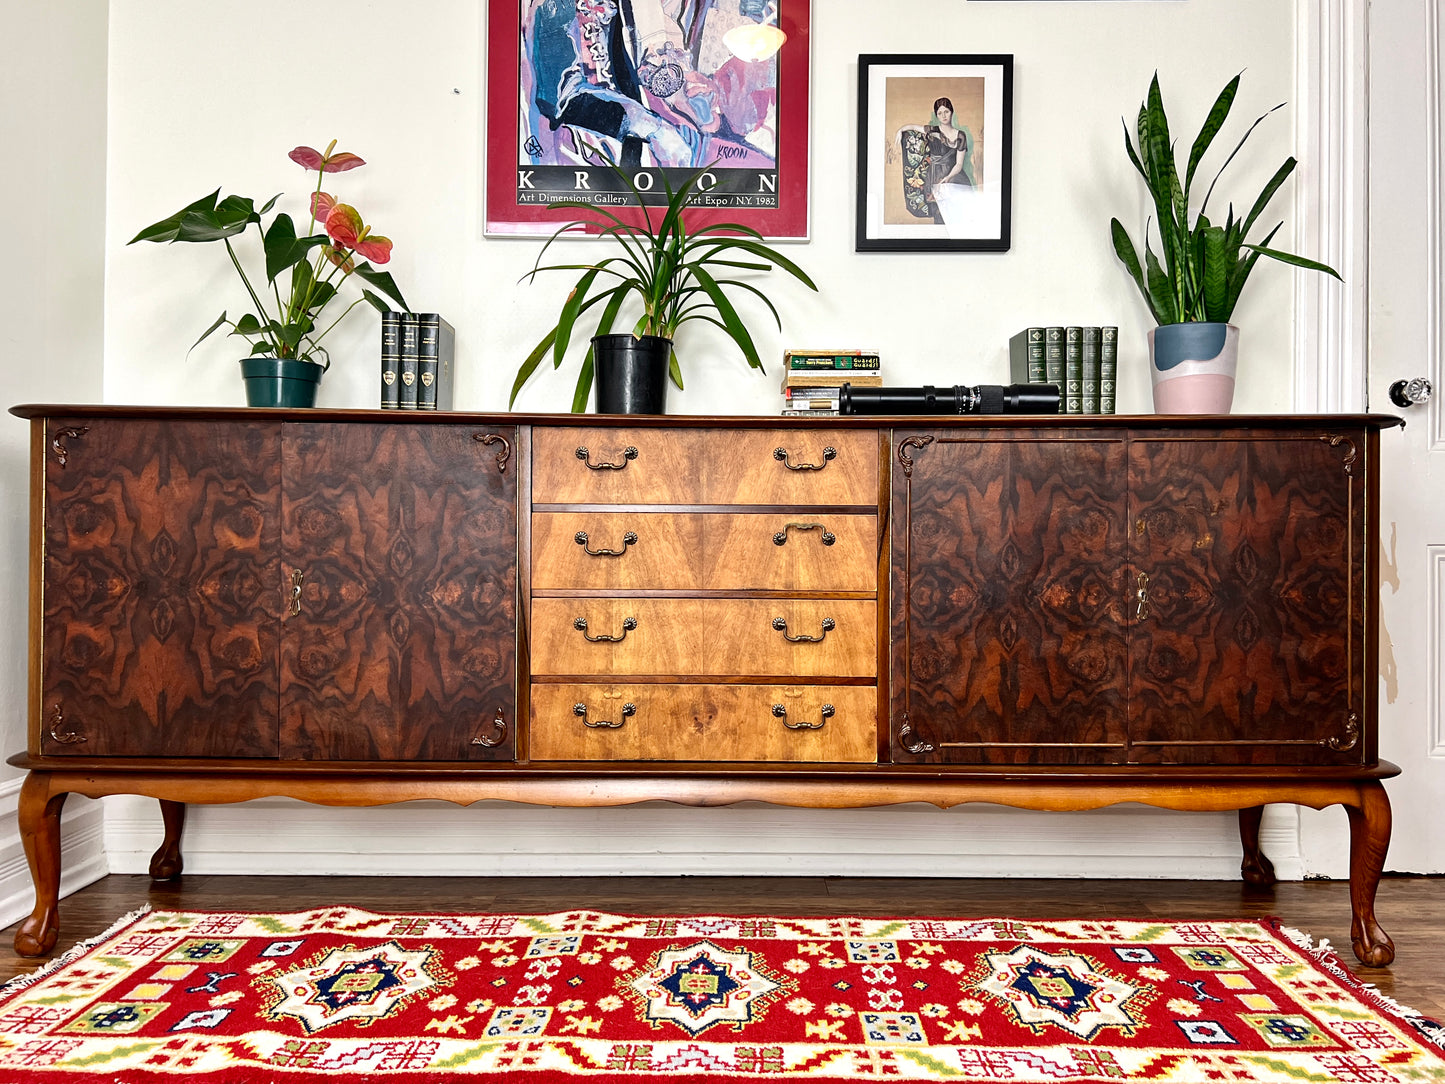 The Rorschach Sideboard